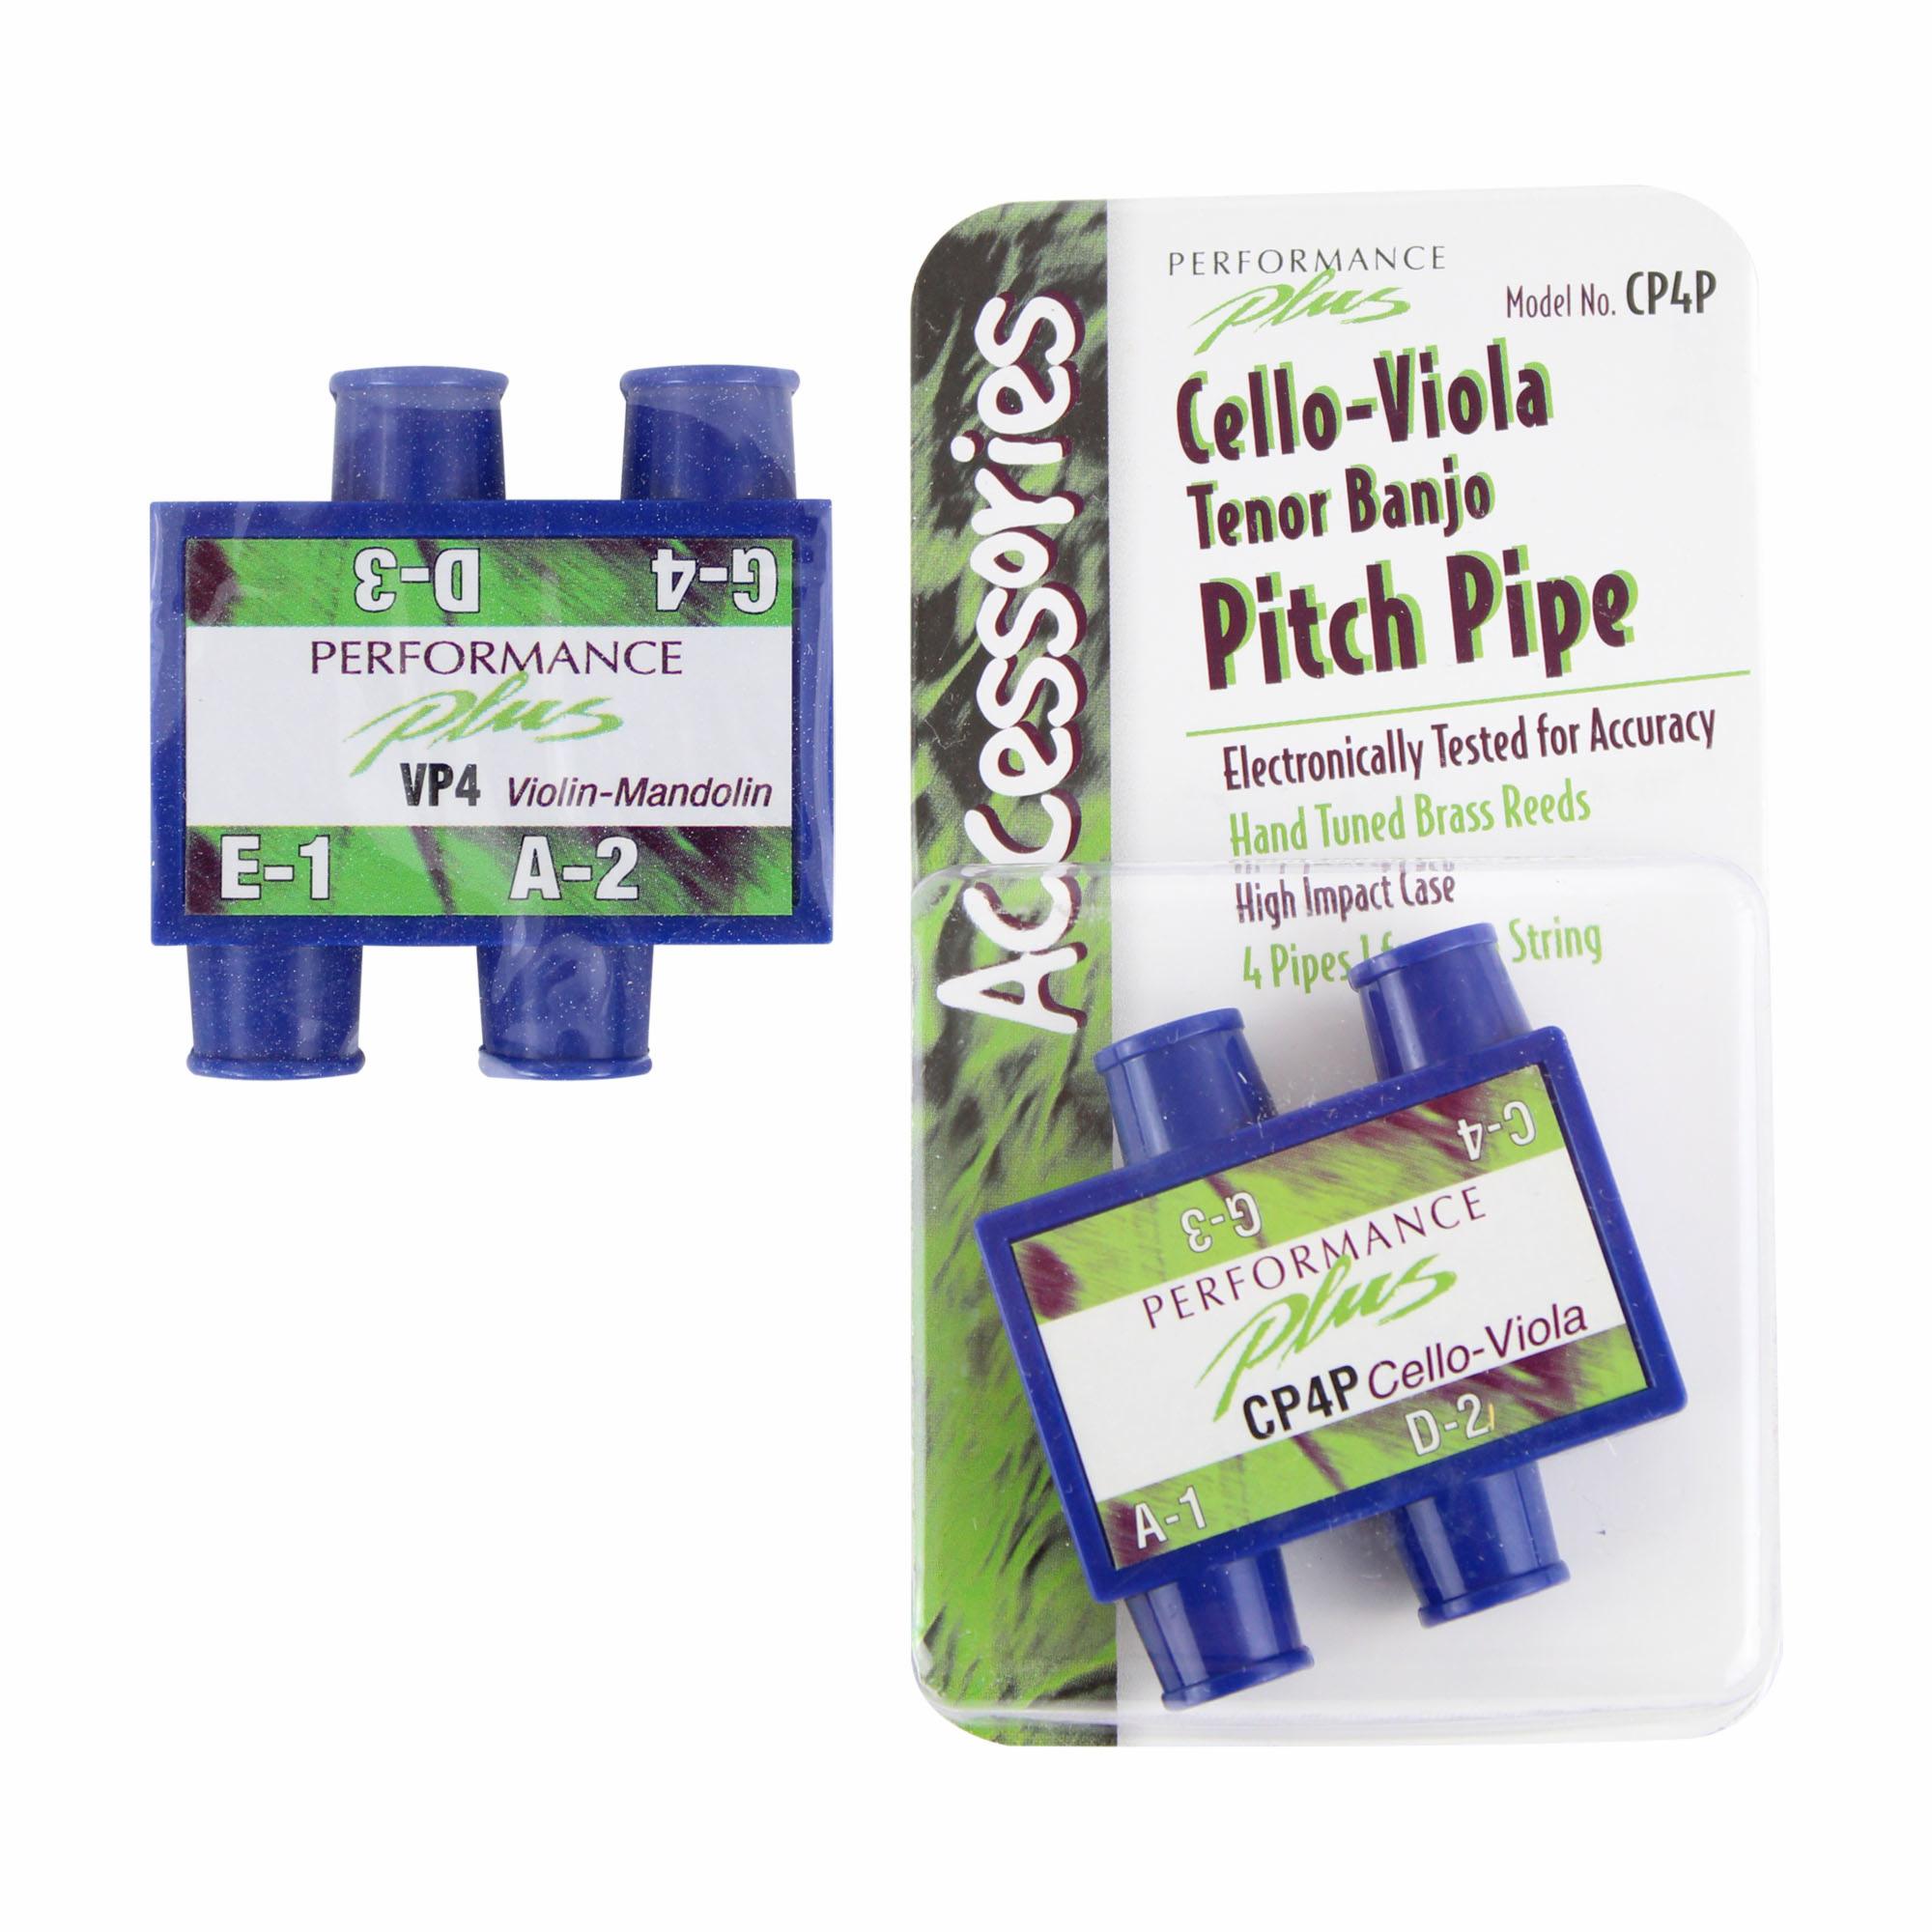 Performance Plus Pitchpipe for Viola/Cello